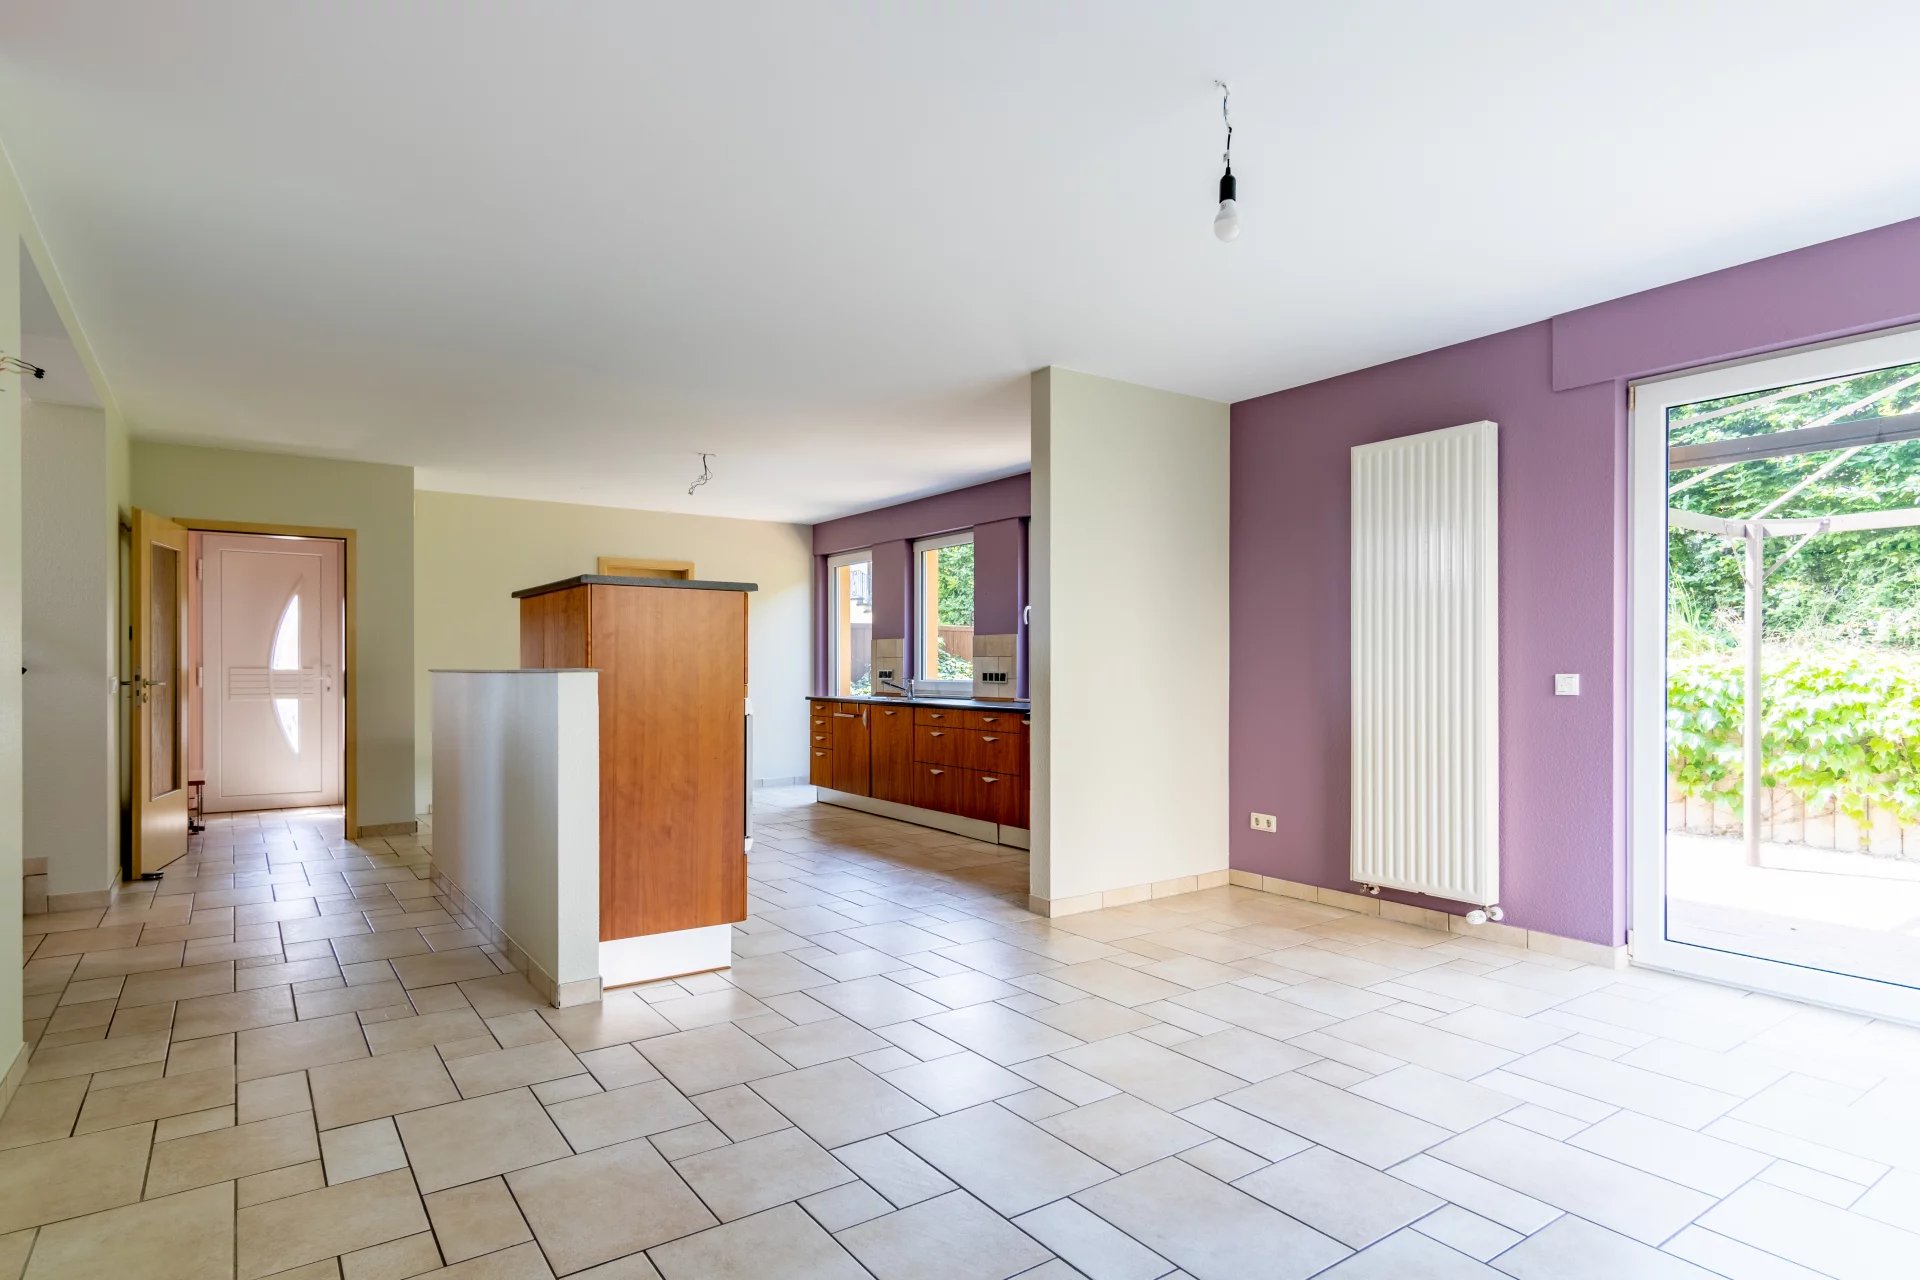 House with 5 bedroom for sale in Moersdorf